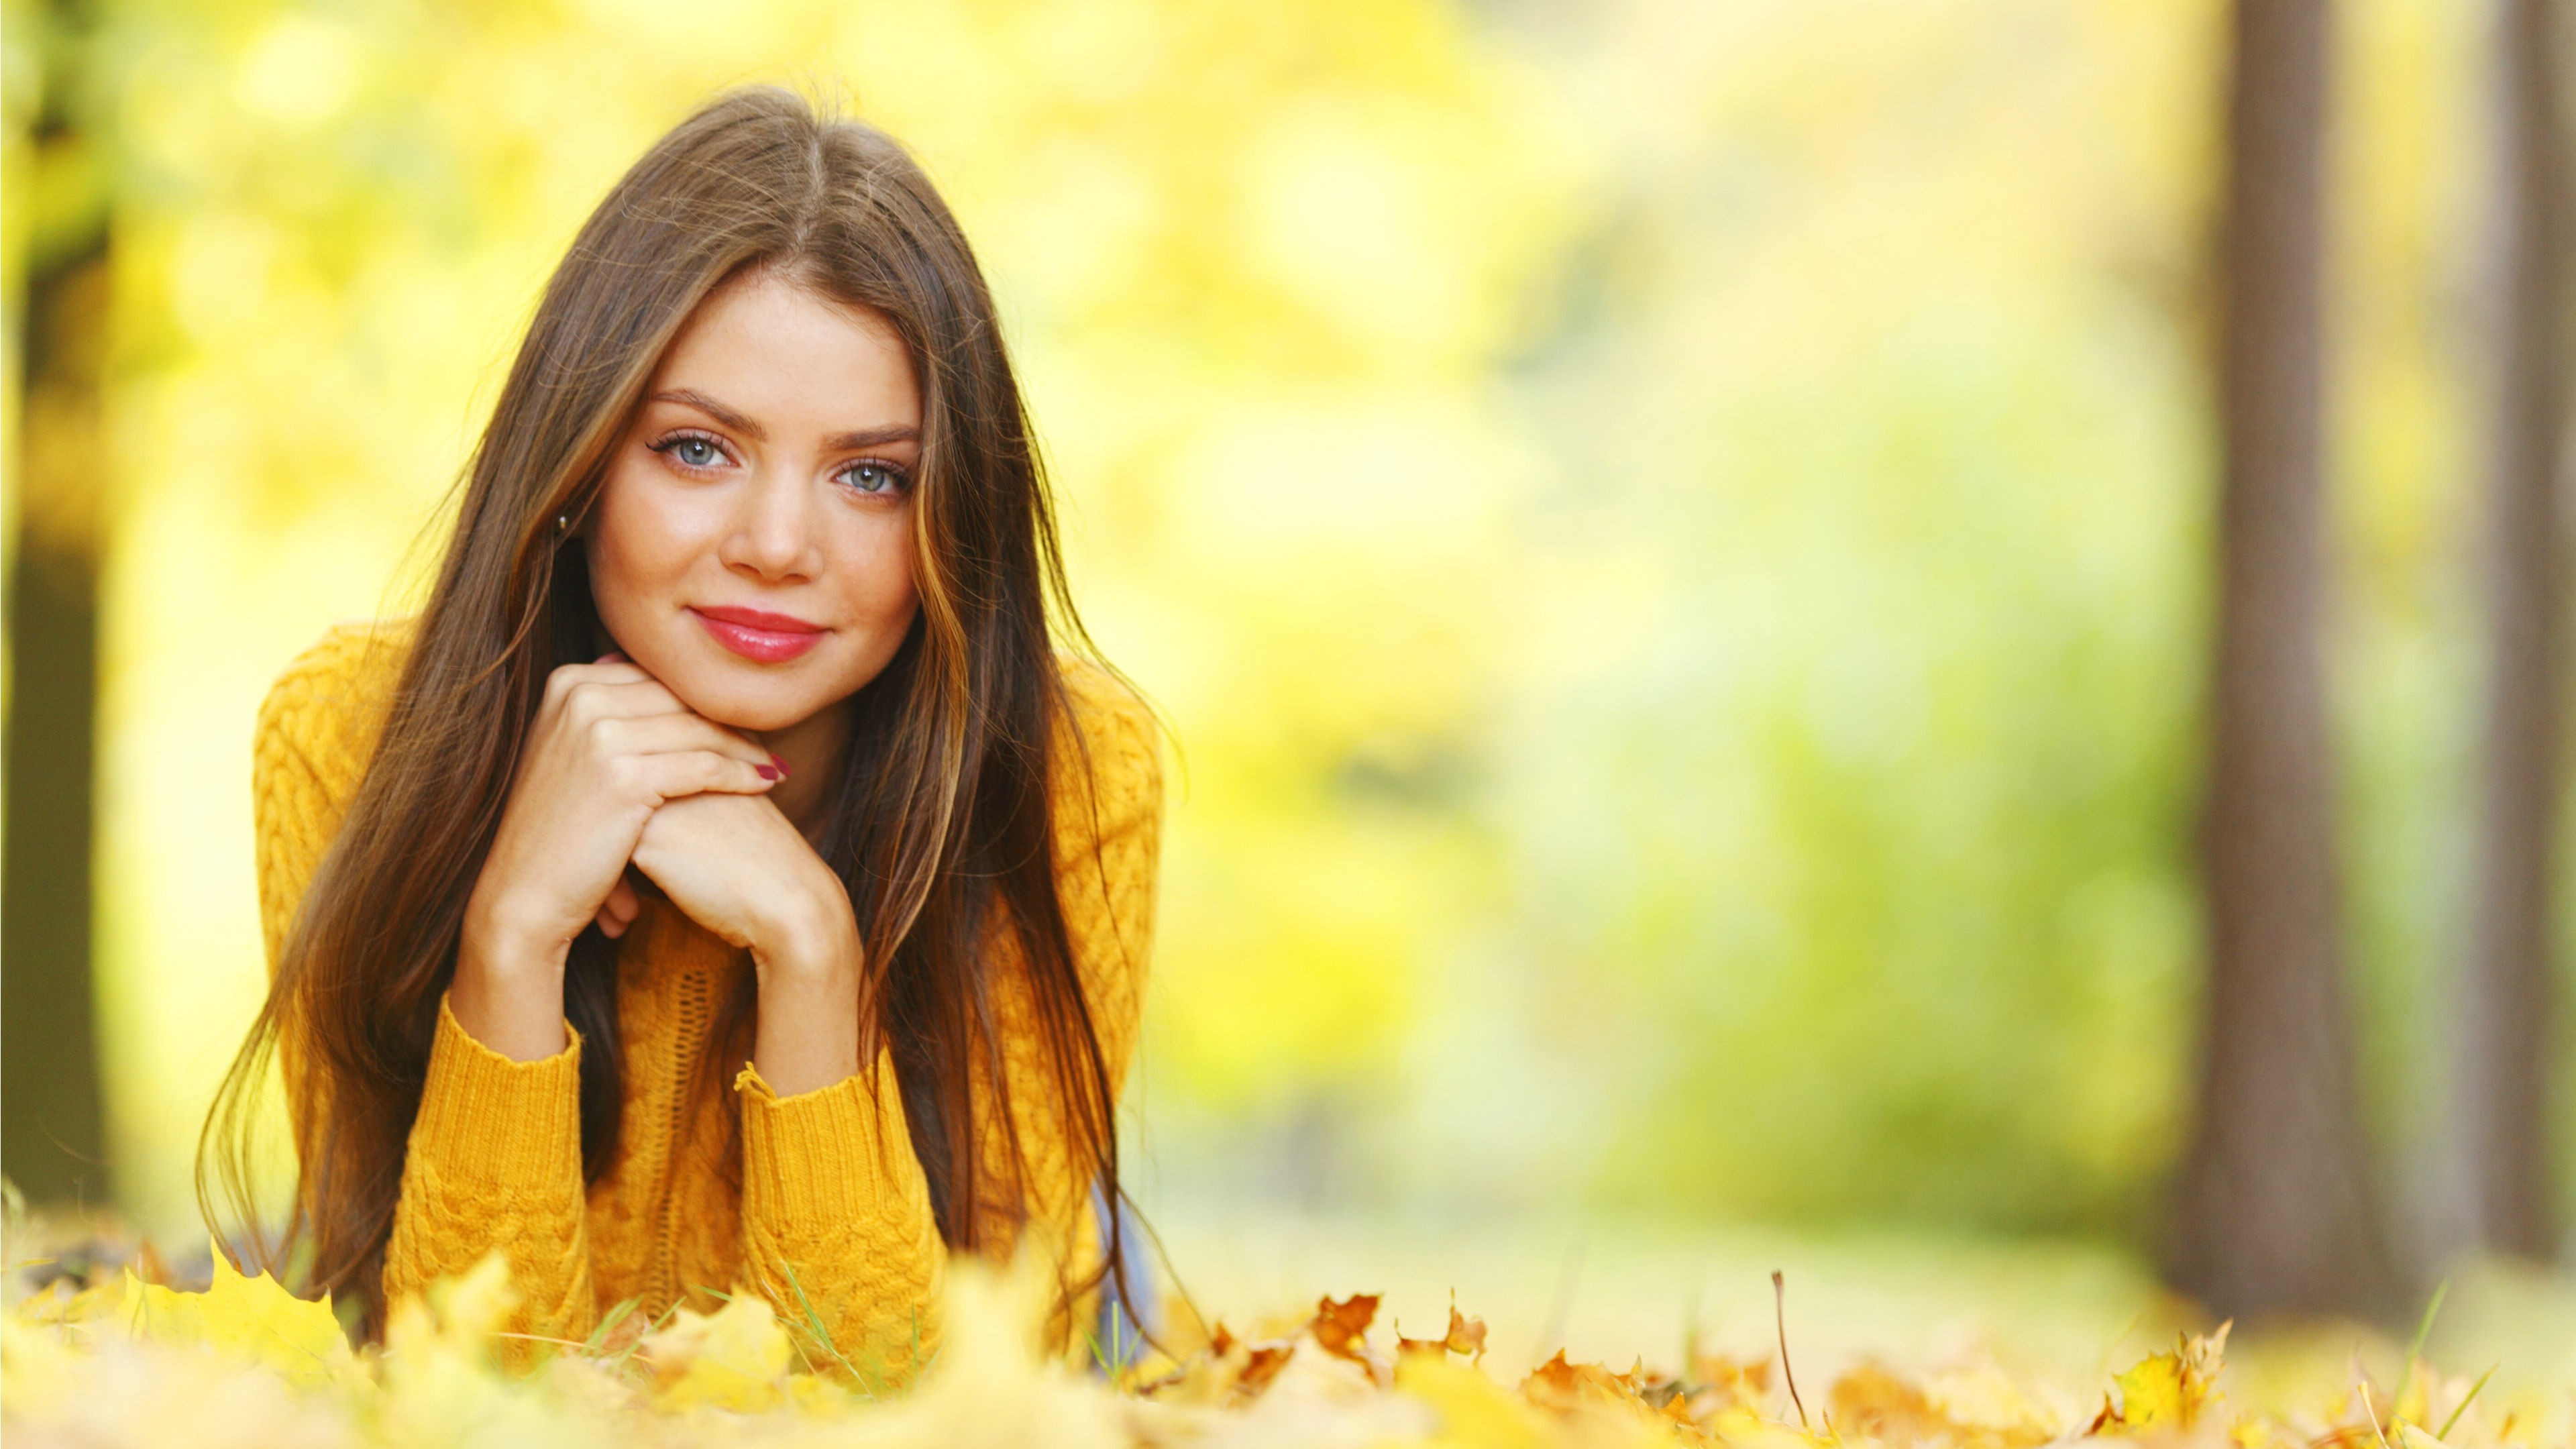 women, Model, Brunette, Long Hair, Women Outdoors, Nature, Face, Portrait, Trees, Smiling, Blue Eyes, Red Lipstick, Sweater, Leaves, Fall, Depth Of Field, Lying On Front, Looking At Viewer Wallpaper